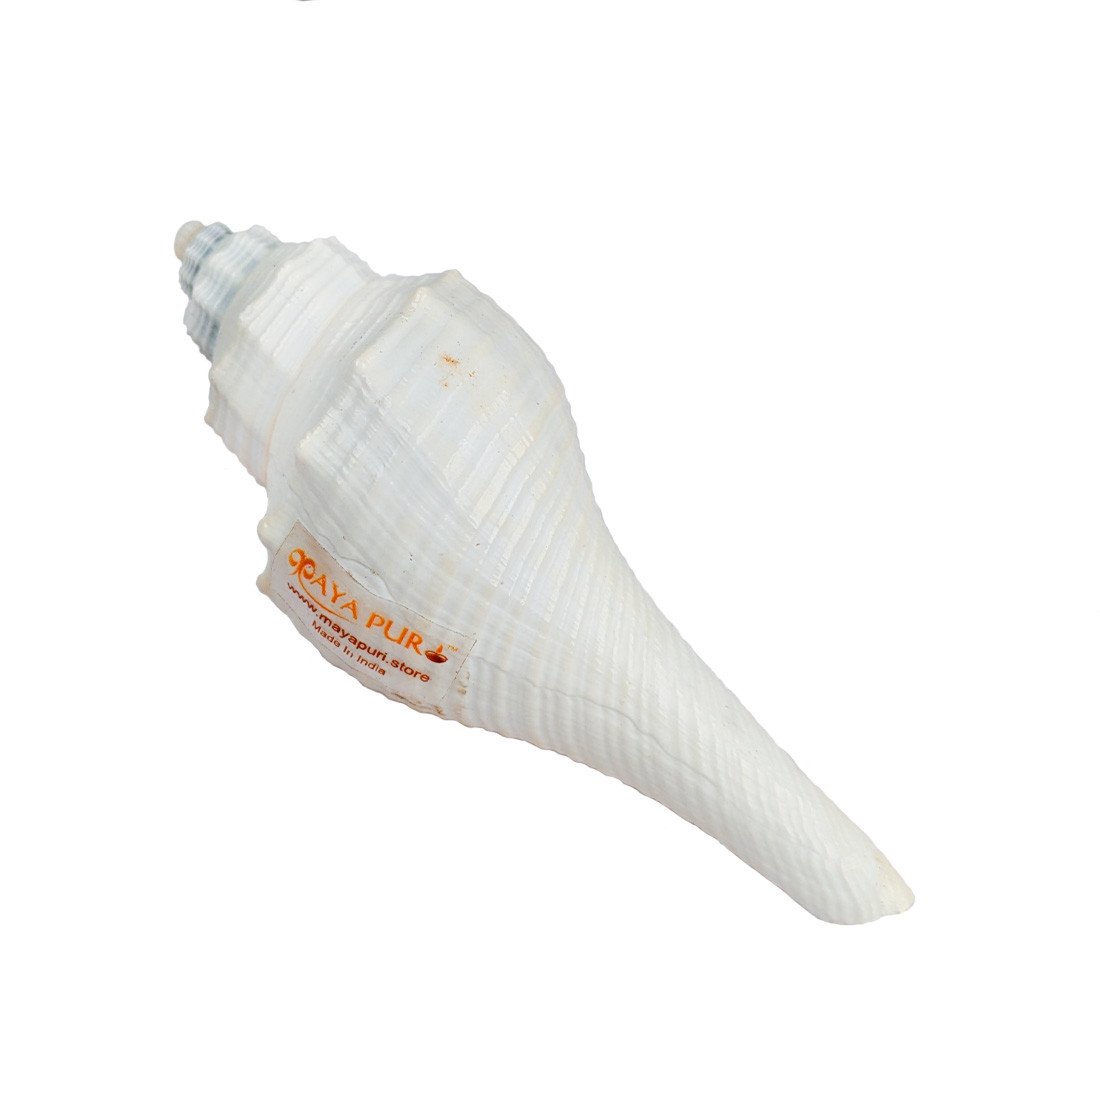 MAYAPURI Natural Conch Shell with Stand for Pooja, Decoration and Aquarium Home Mandir & Pooja Articles(Pack of 1)